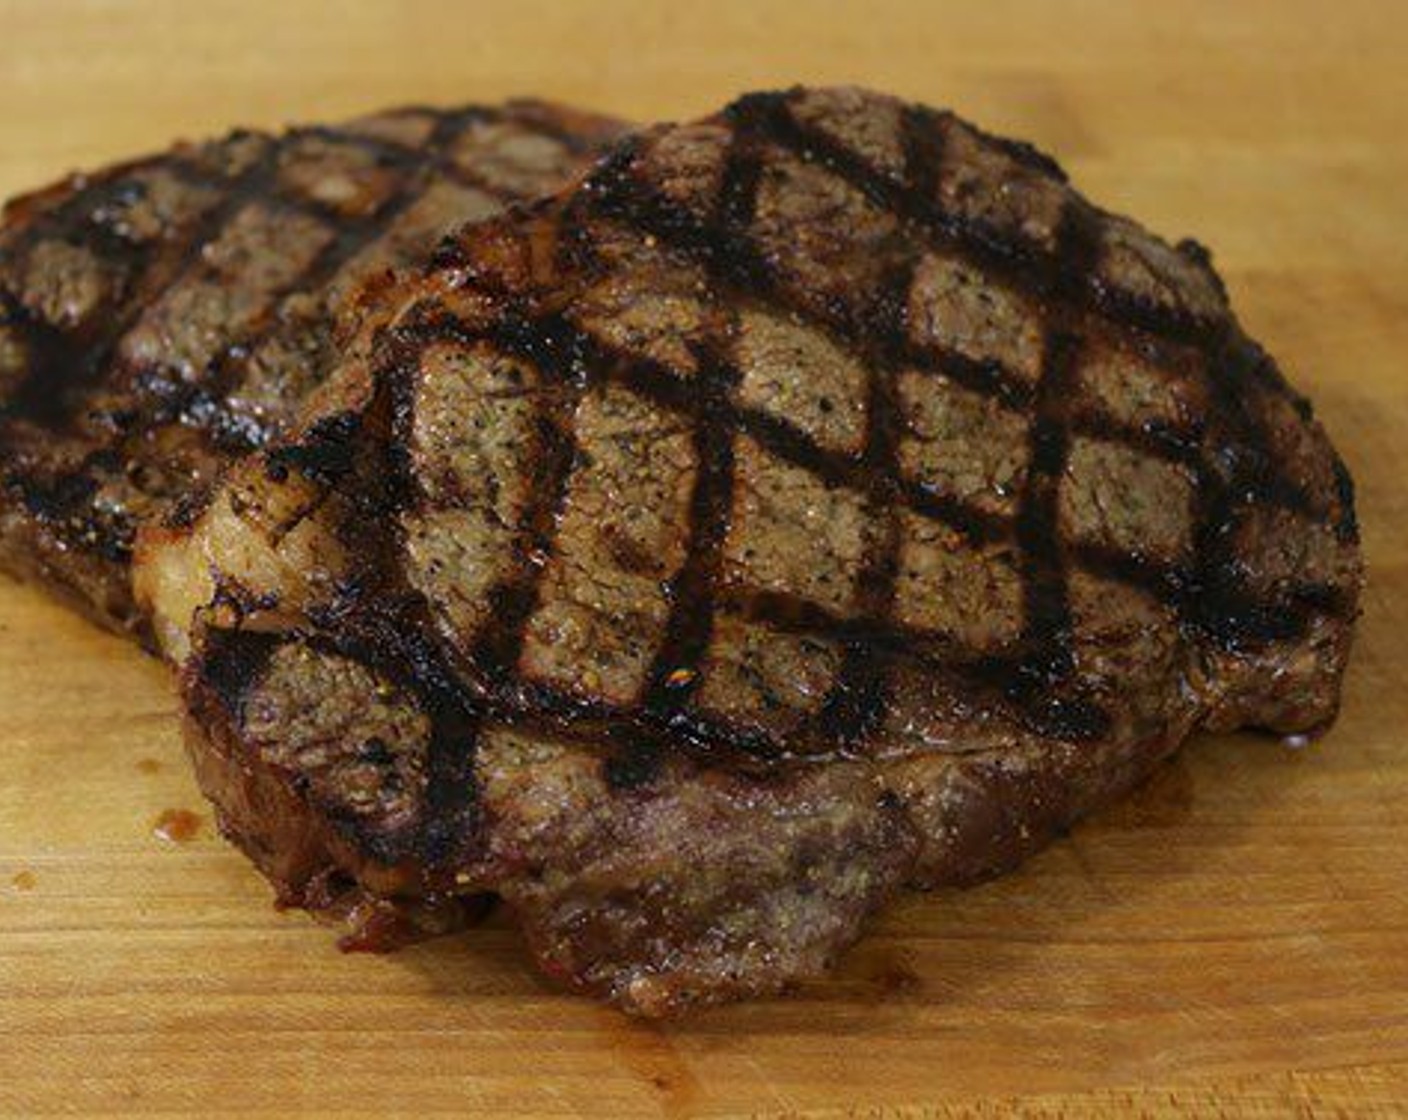 step 8 If you like your steak more done leave it on the grill for additional time. 2 additional minutes for medium and 4 for medium well.